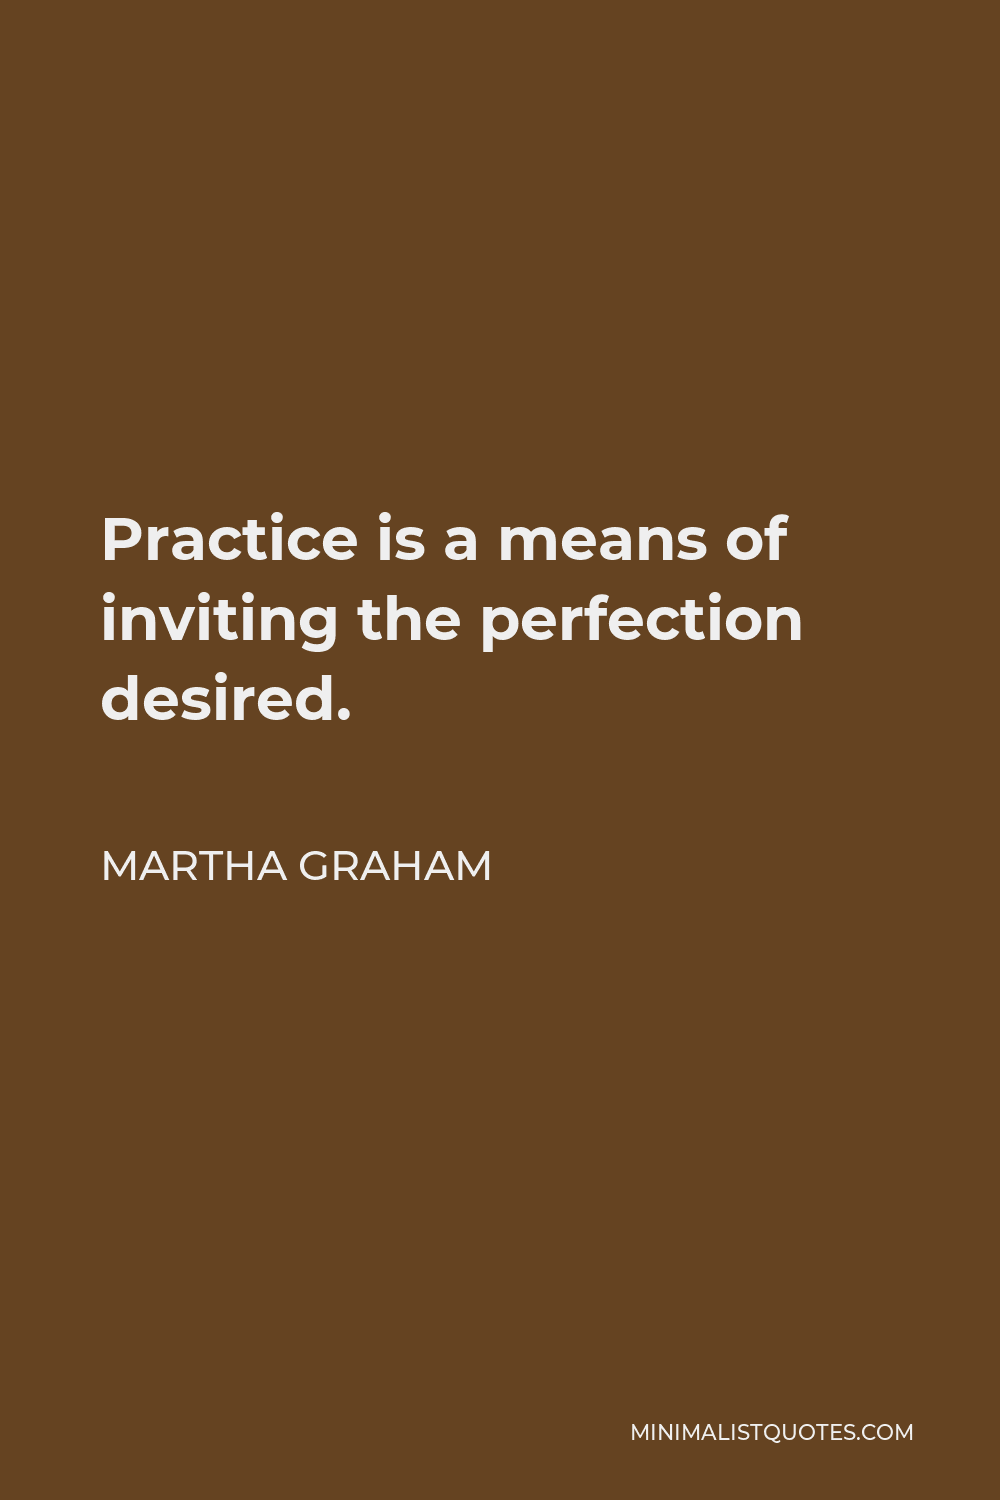 Martha Graham Quote - Practice is a means of inviting the perfection desired.